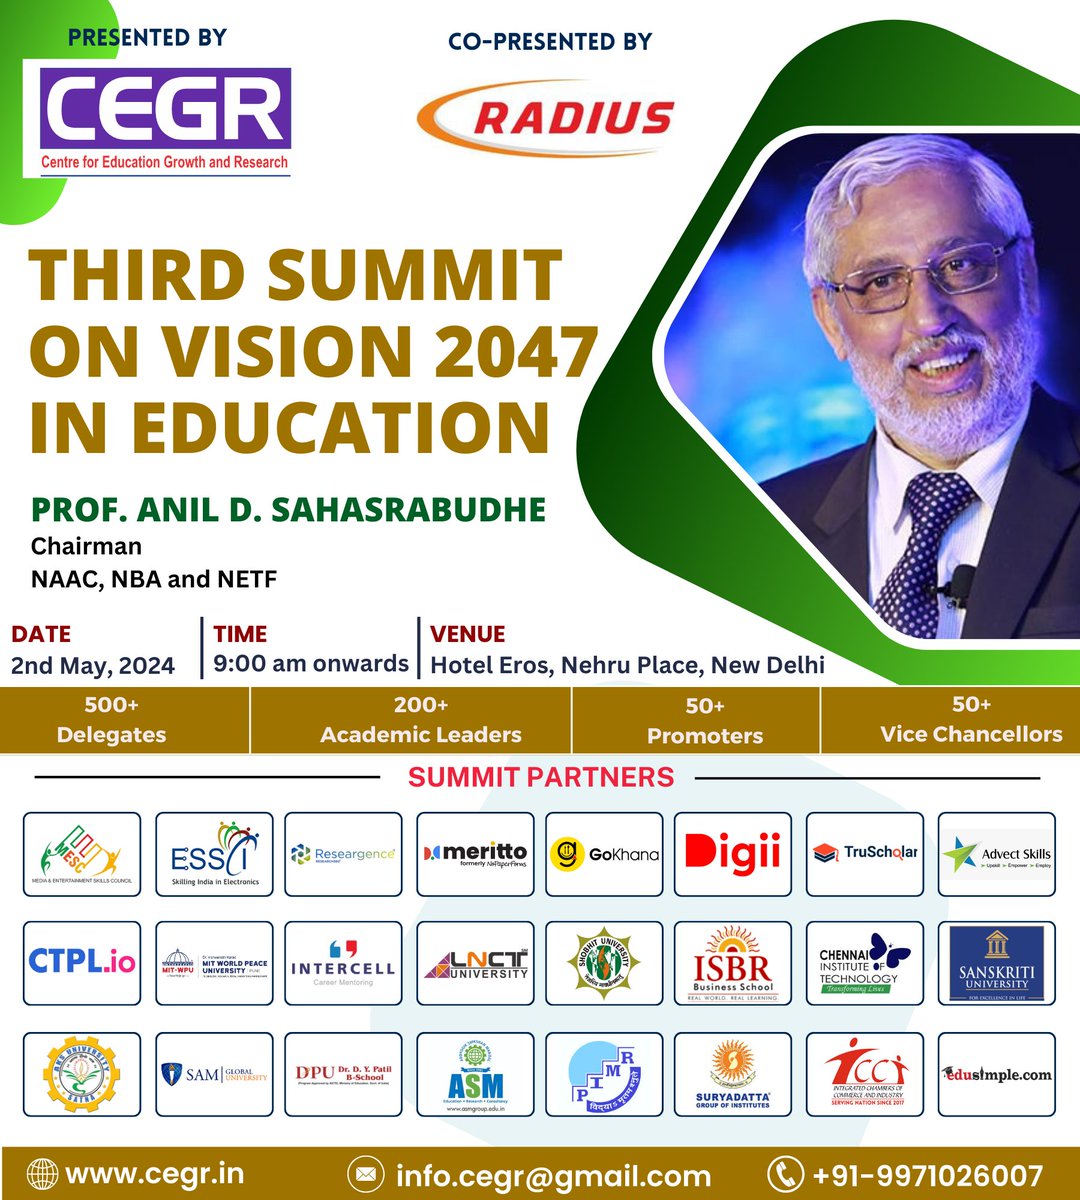 We are delighted to Welcome Prof. Anil D. Sahasrabudhe, Chairman, NAAC, NBA and NETF in Third Summit on Vision 2047 in Education on 2nd May, 2024 (Thursday) in Royal Ball Room, Hotel Eros, Nehru Place, New Delhi.

To Know more, please visit cegr.in/events.php
#CEGR